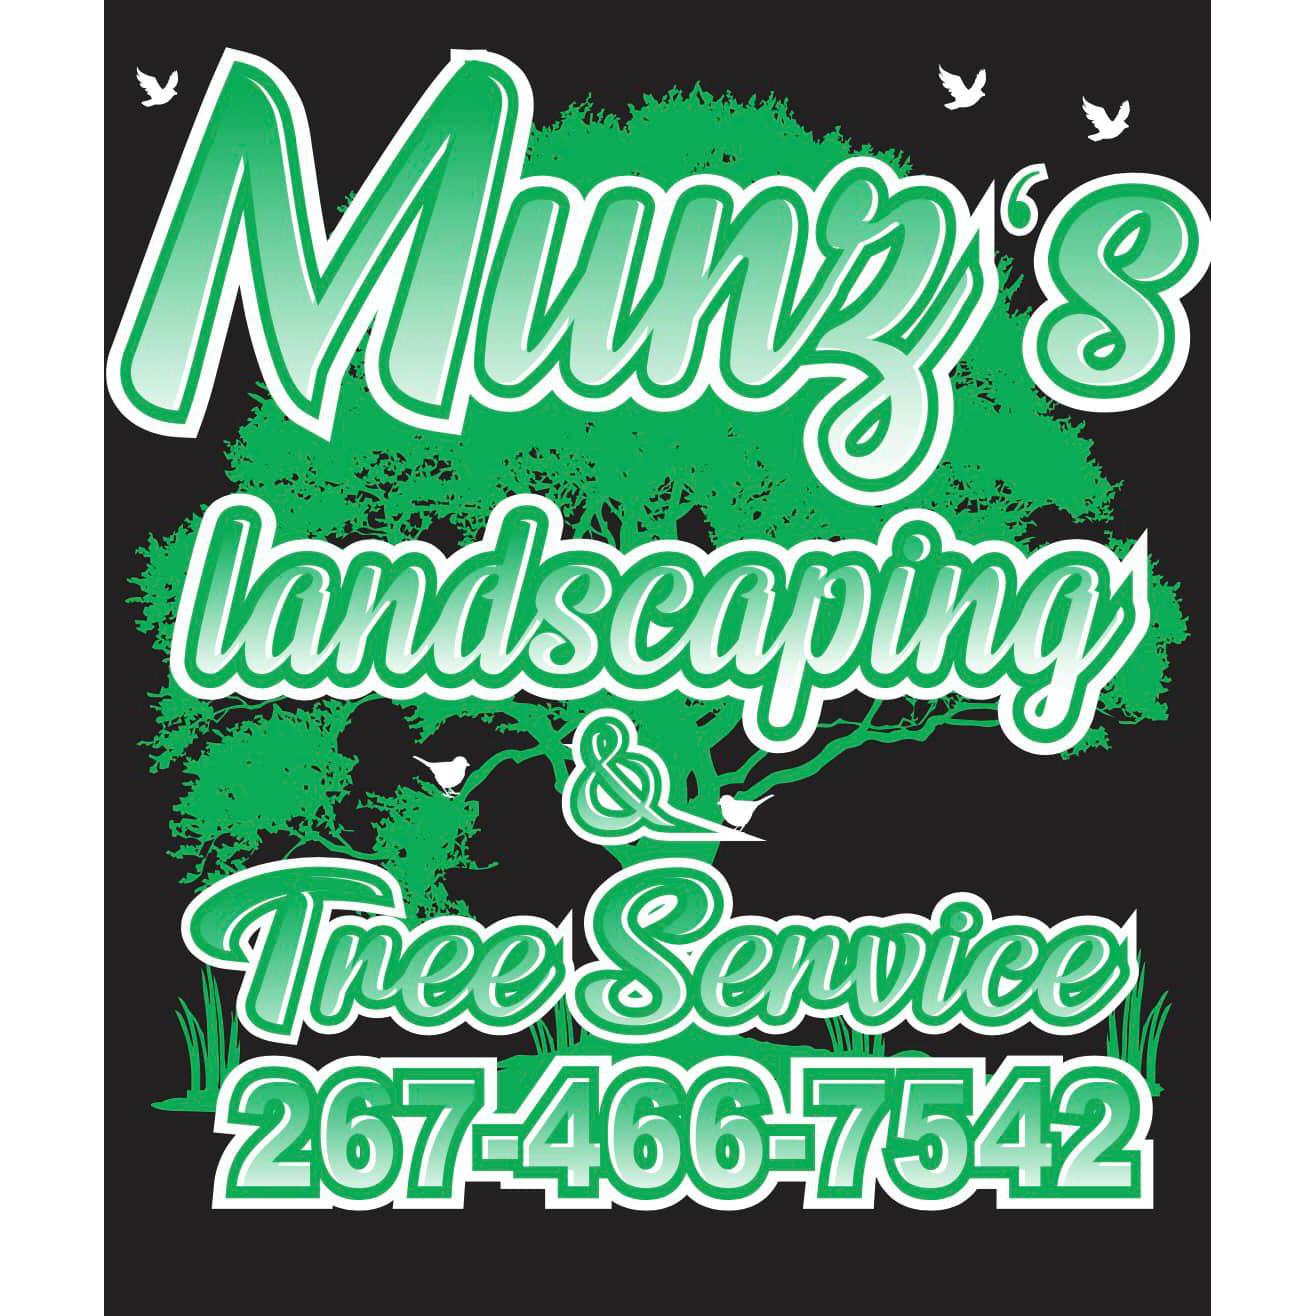 Munz's Lawn Service & Landscaping